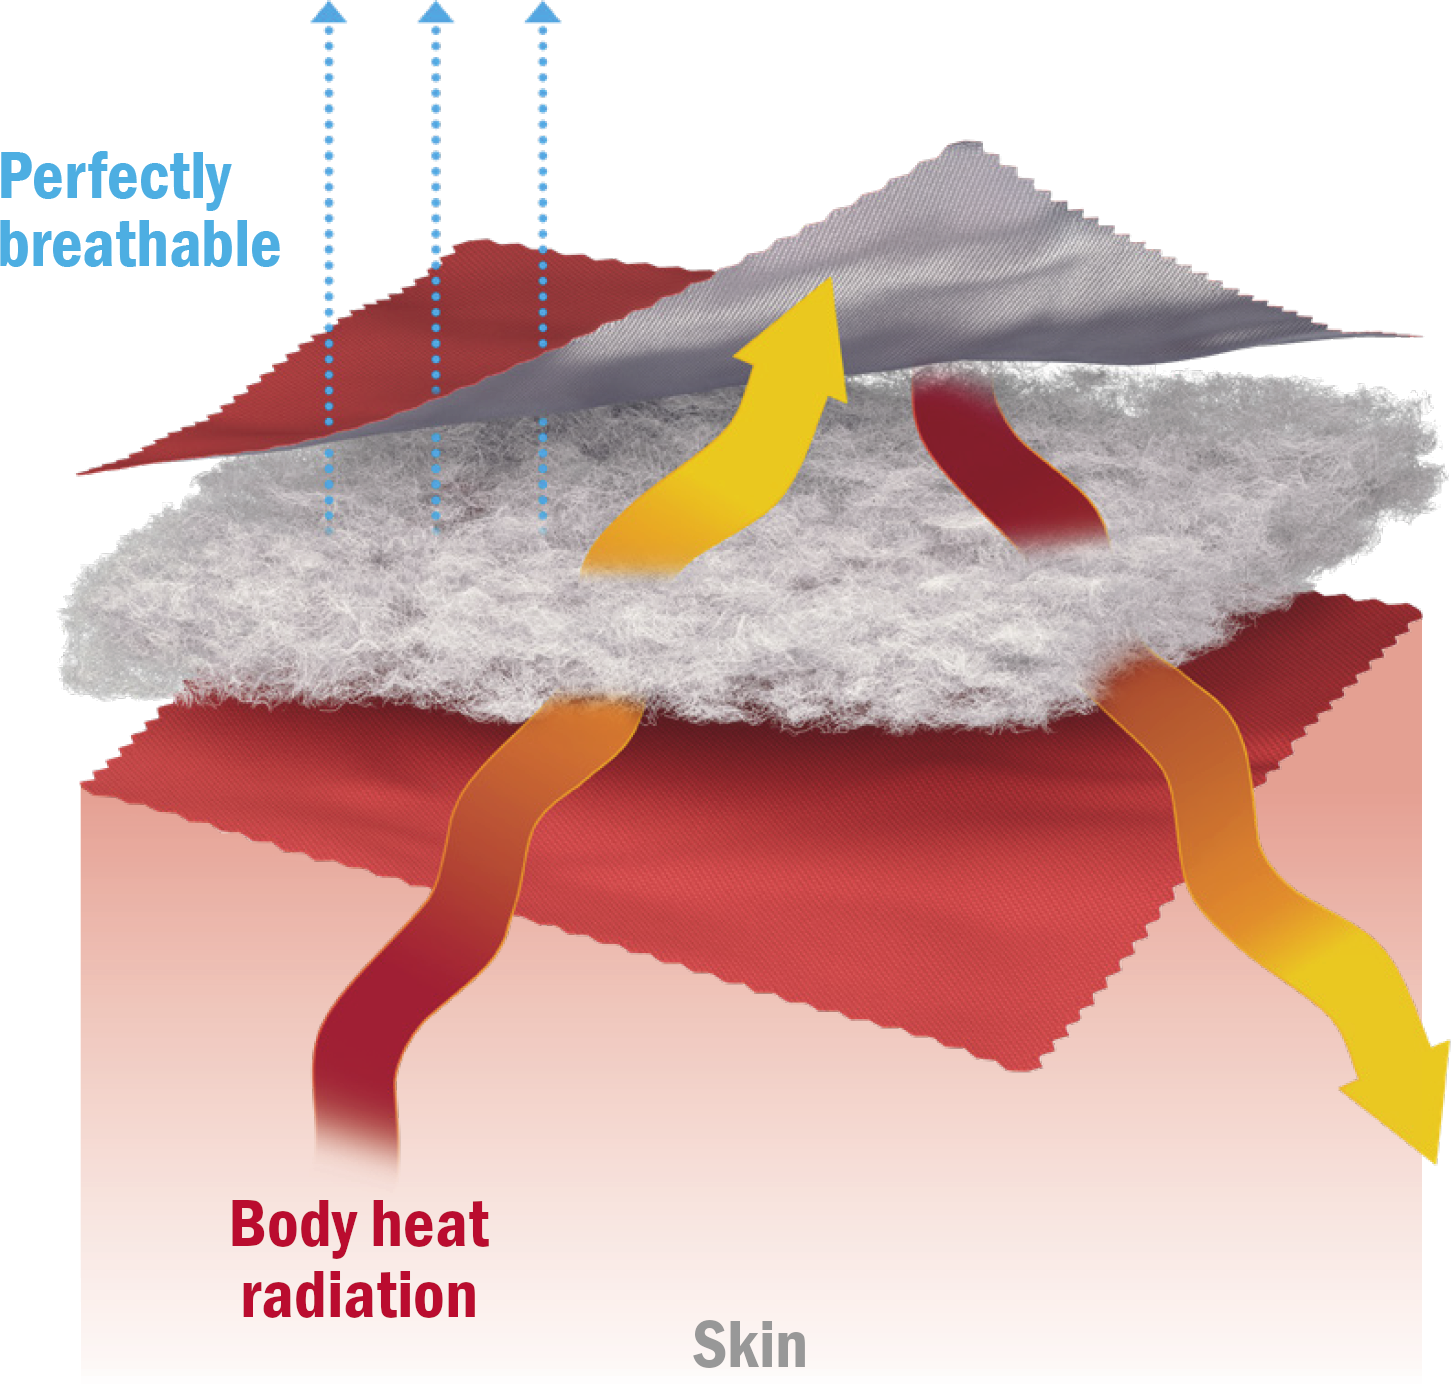 Illustration of a high performance fabric enhanced with radiant barrier technology HeiQ XReflex